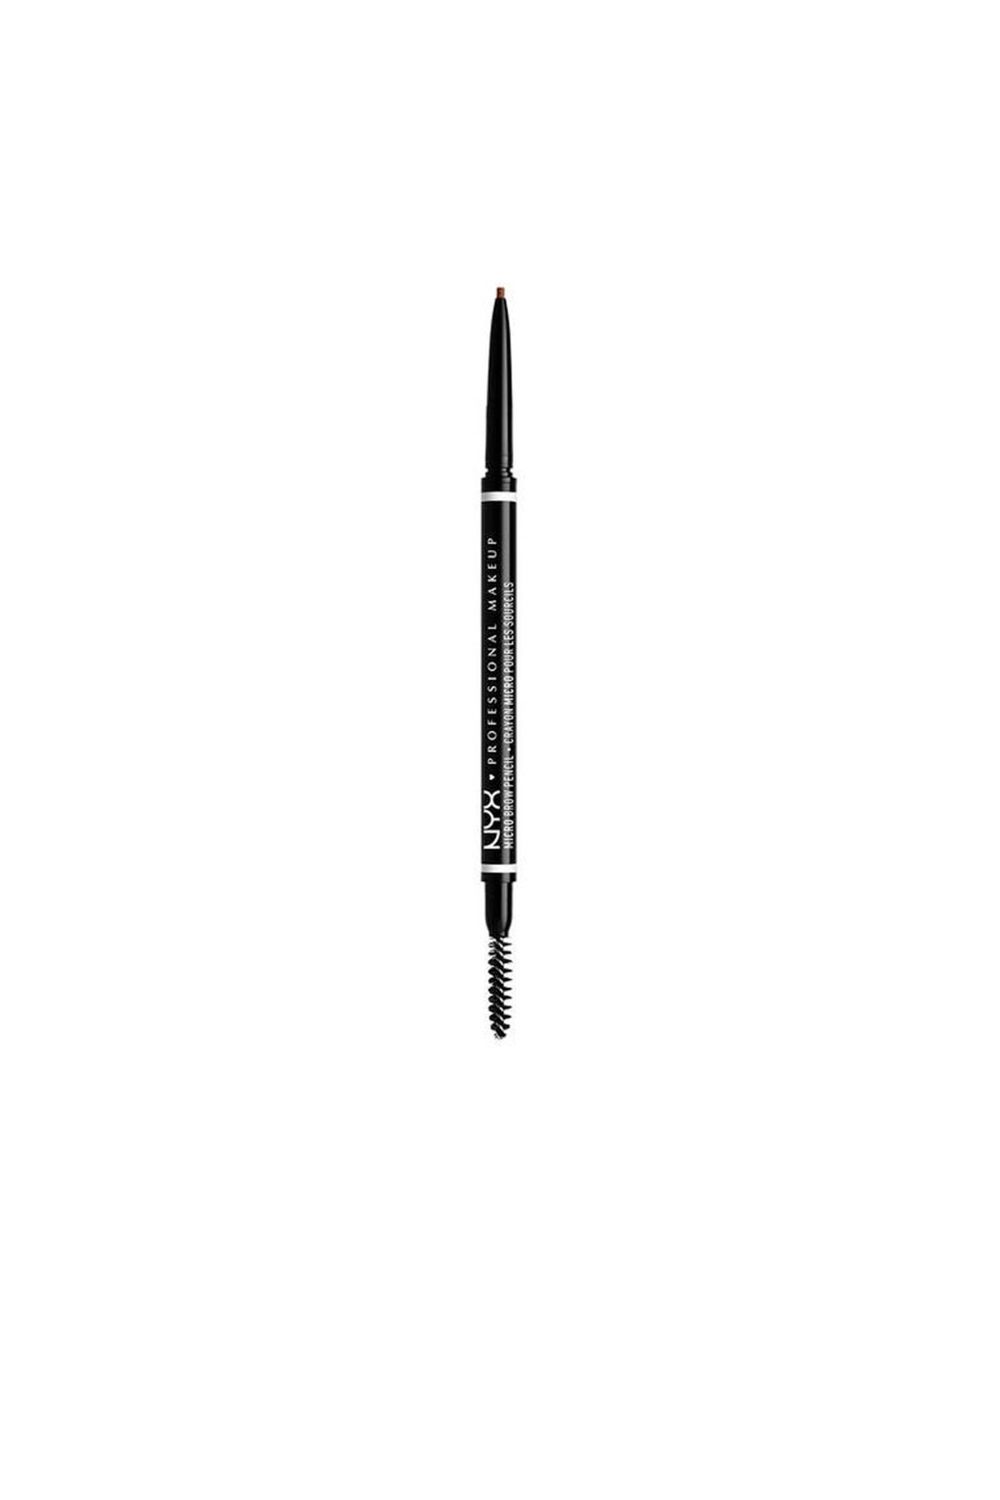 Professional Trendyol Brow Makeup NYX - #brunette 0,5 Pencil Micro g